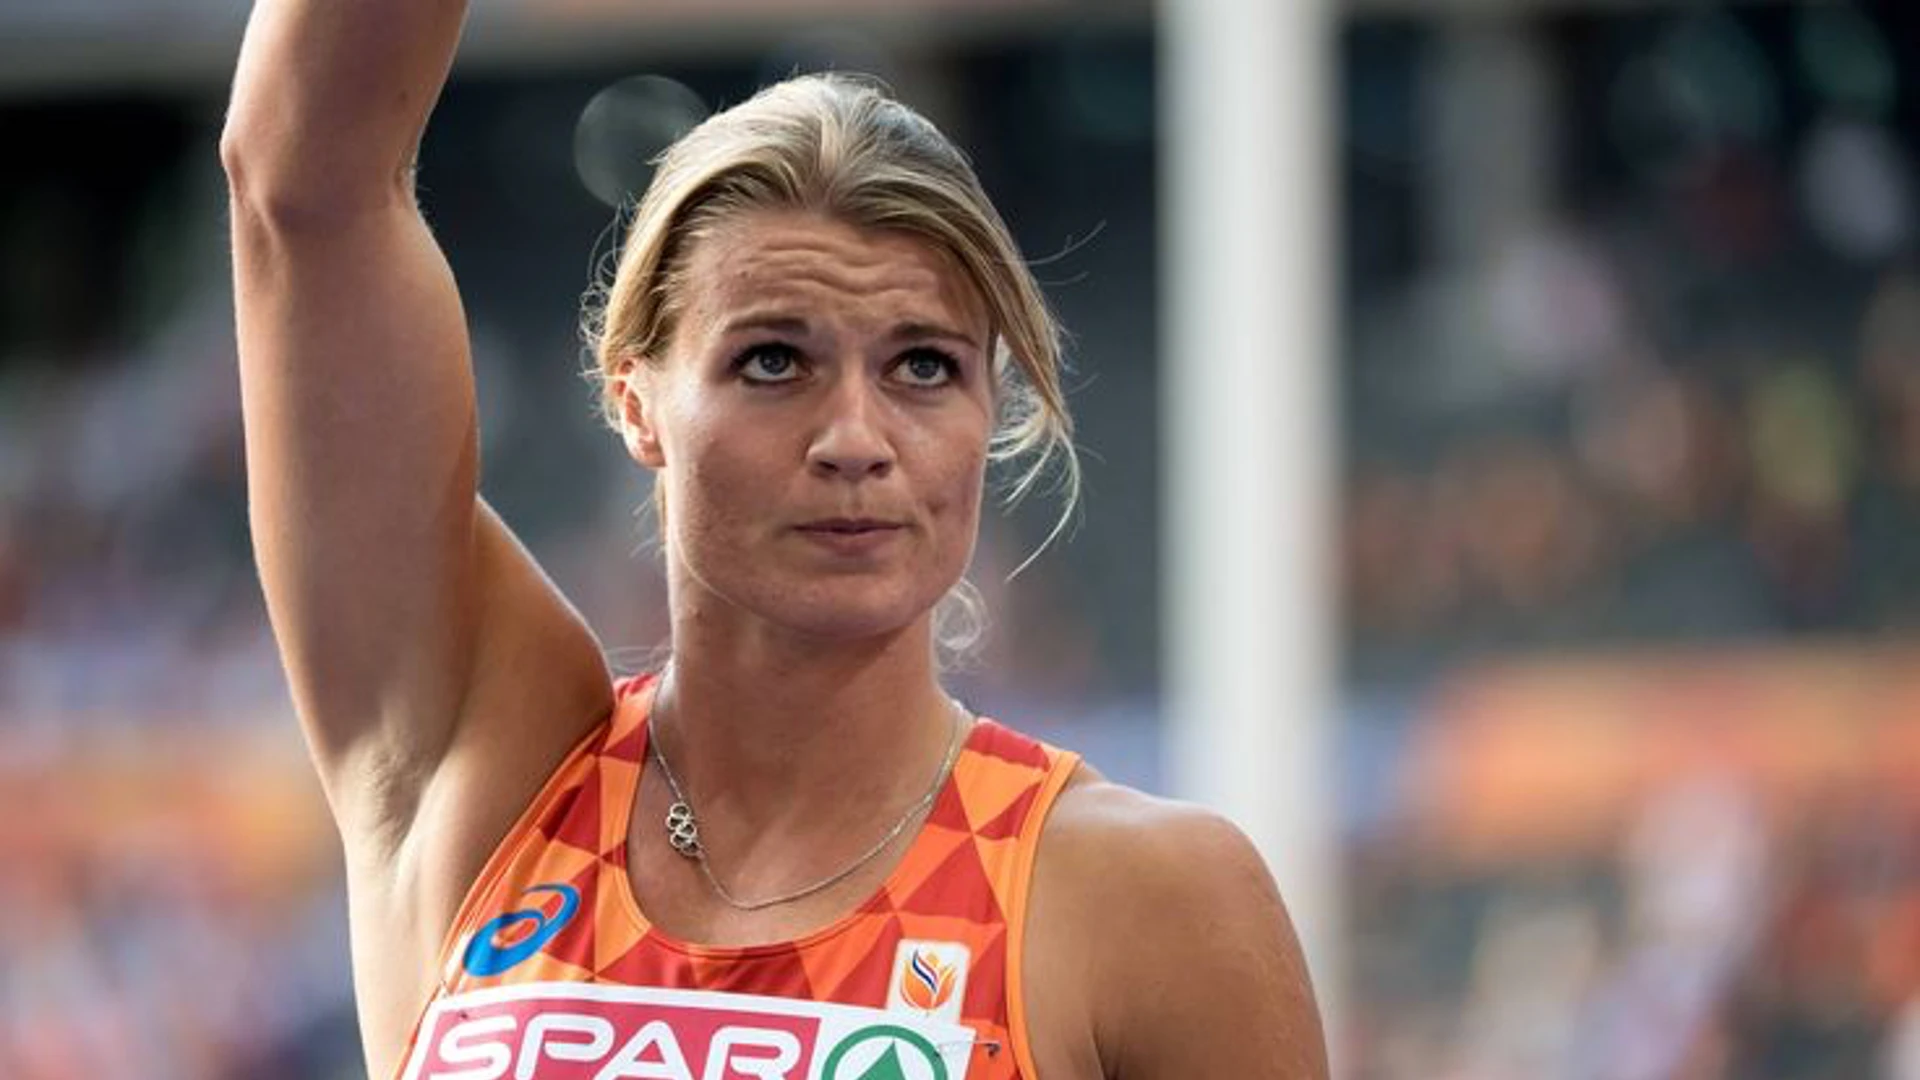 Dafne Schippers to race in 100m at Guldensporenmeeting 2022, how to watch it?